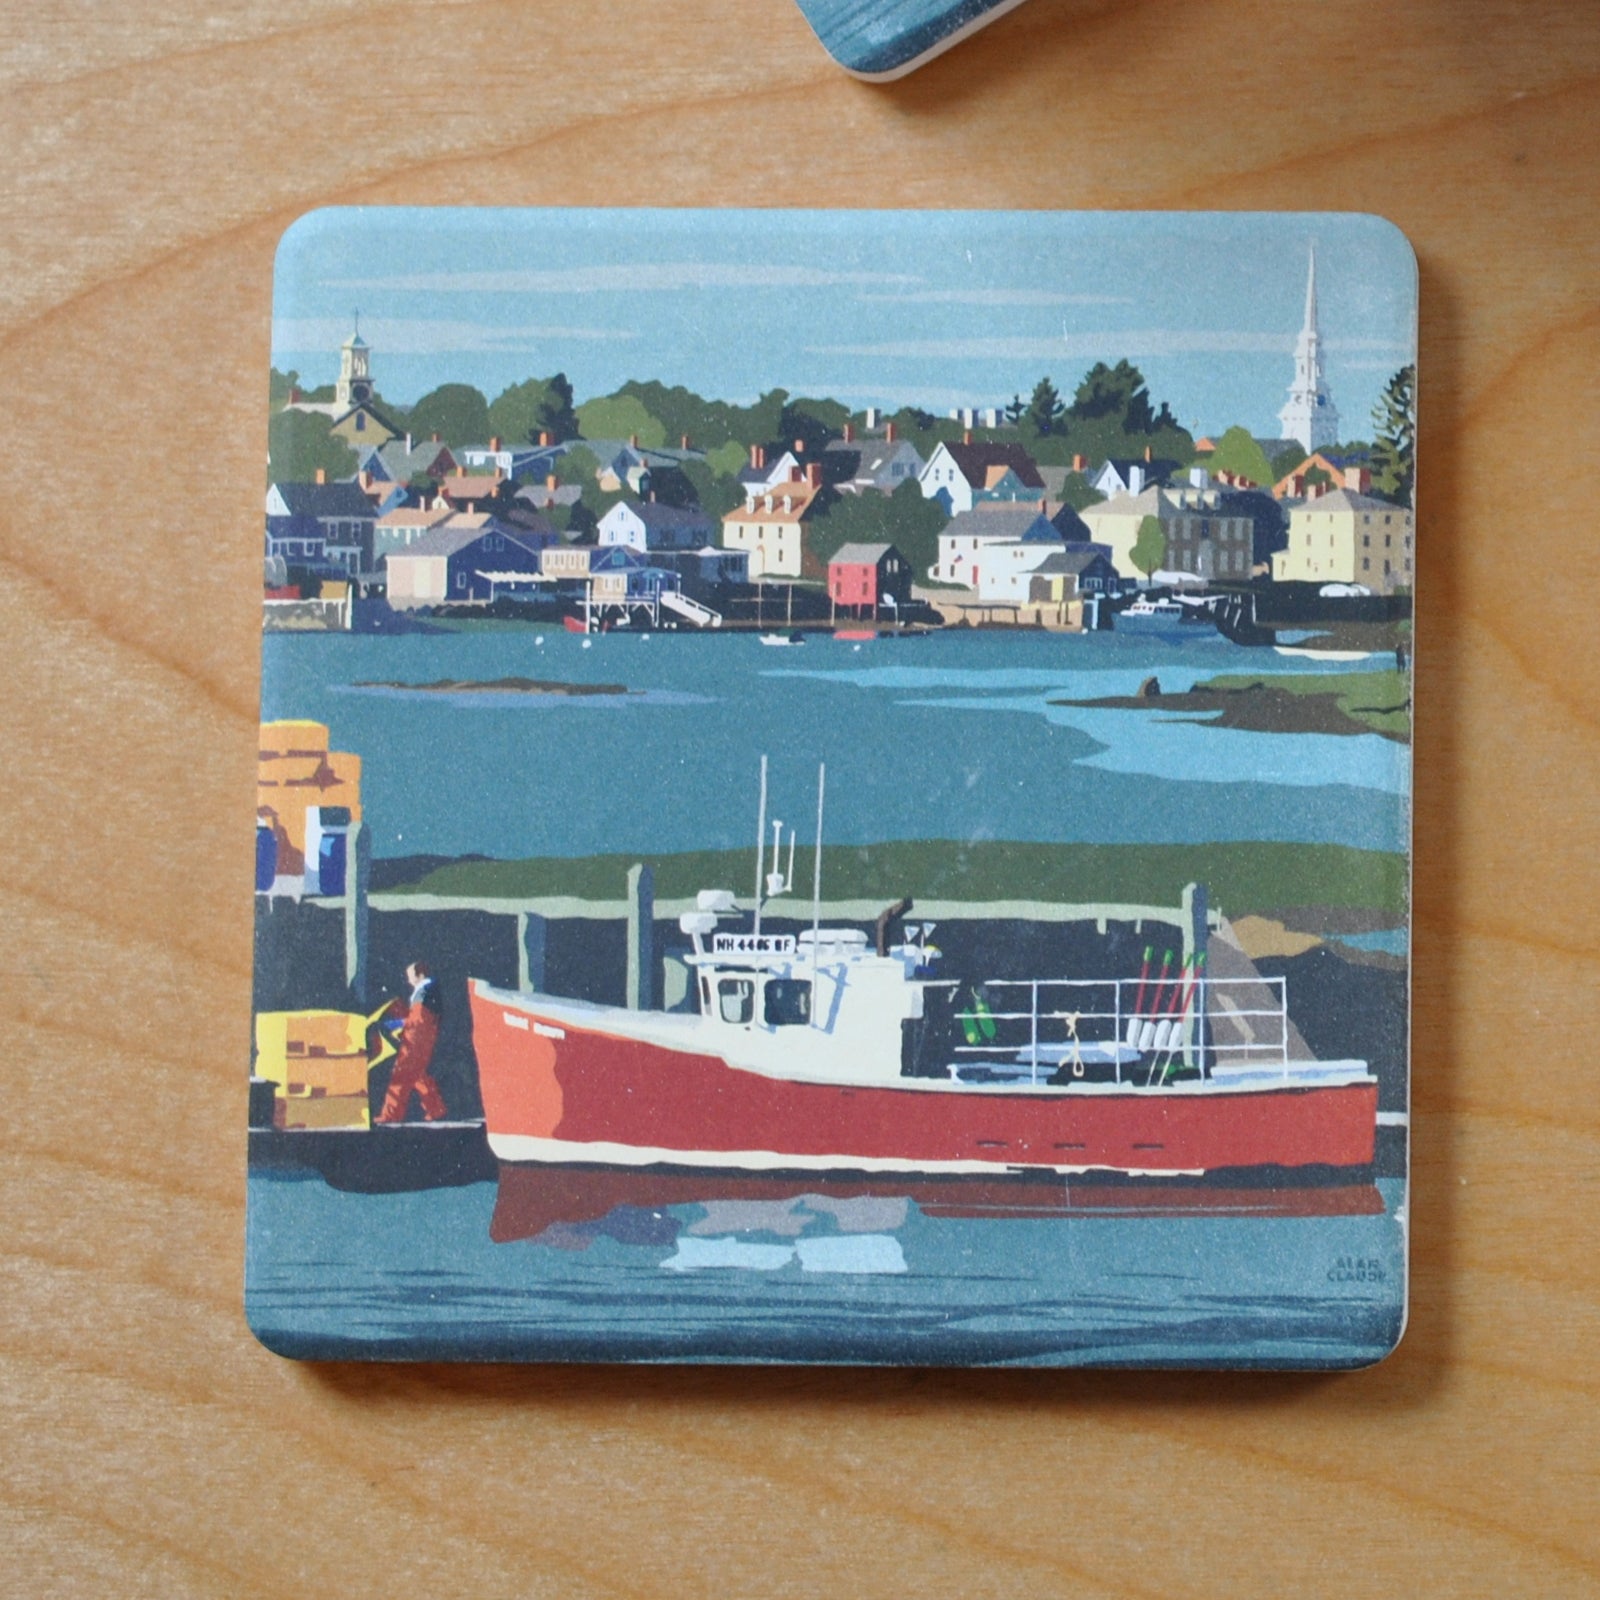 Red Lobster Boat Art Drink Coaster - New Hampshire